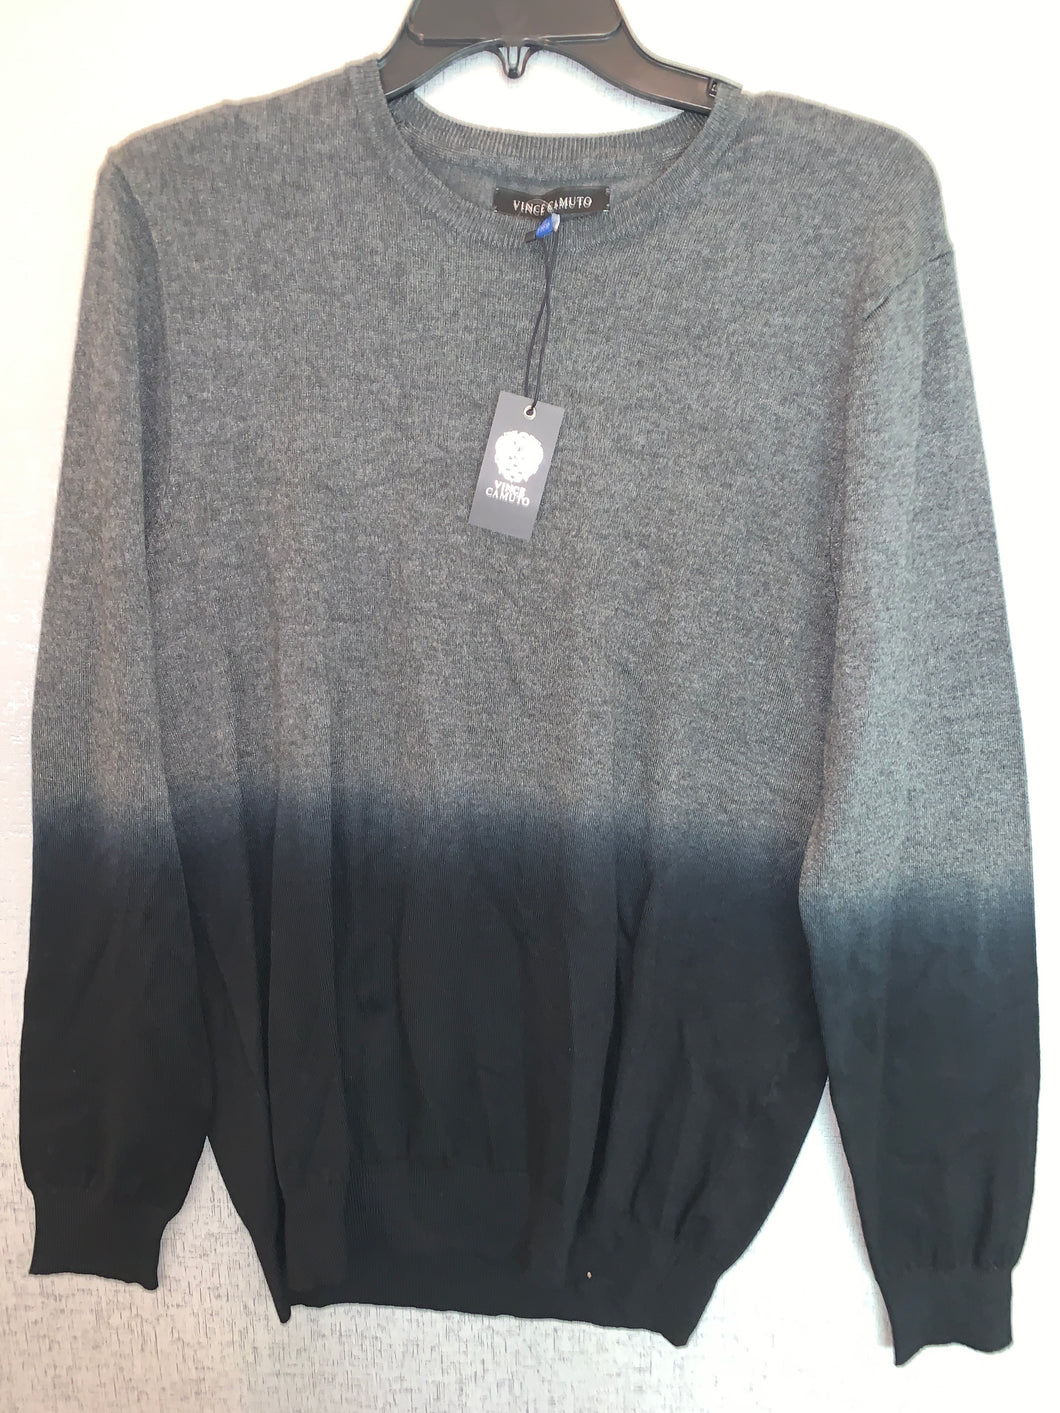 New - Vince Camuto Men's Long Sleeve Crew Neck shirt - Grey/Black Charcoal Fade - VK109S Color 86759 - Size XS